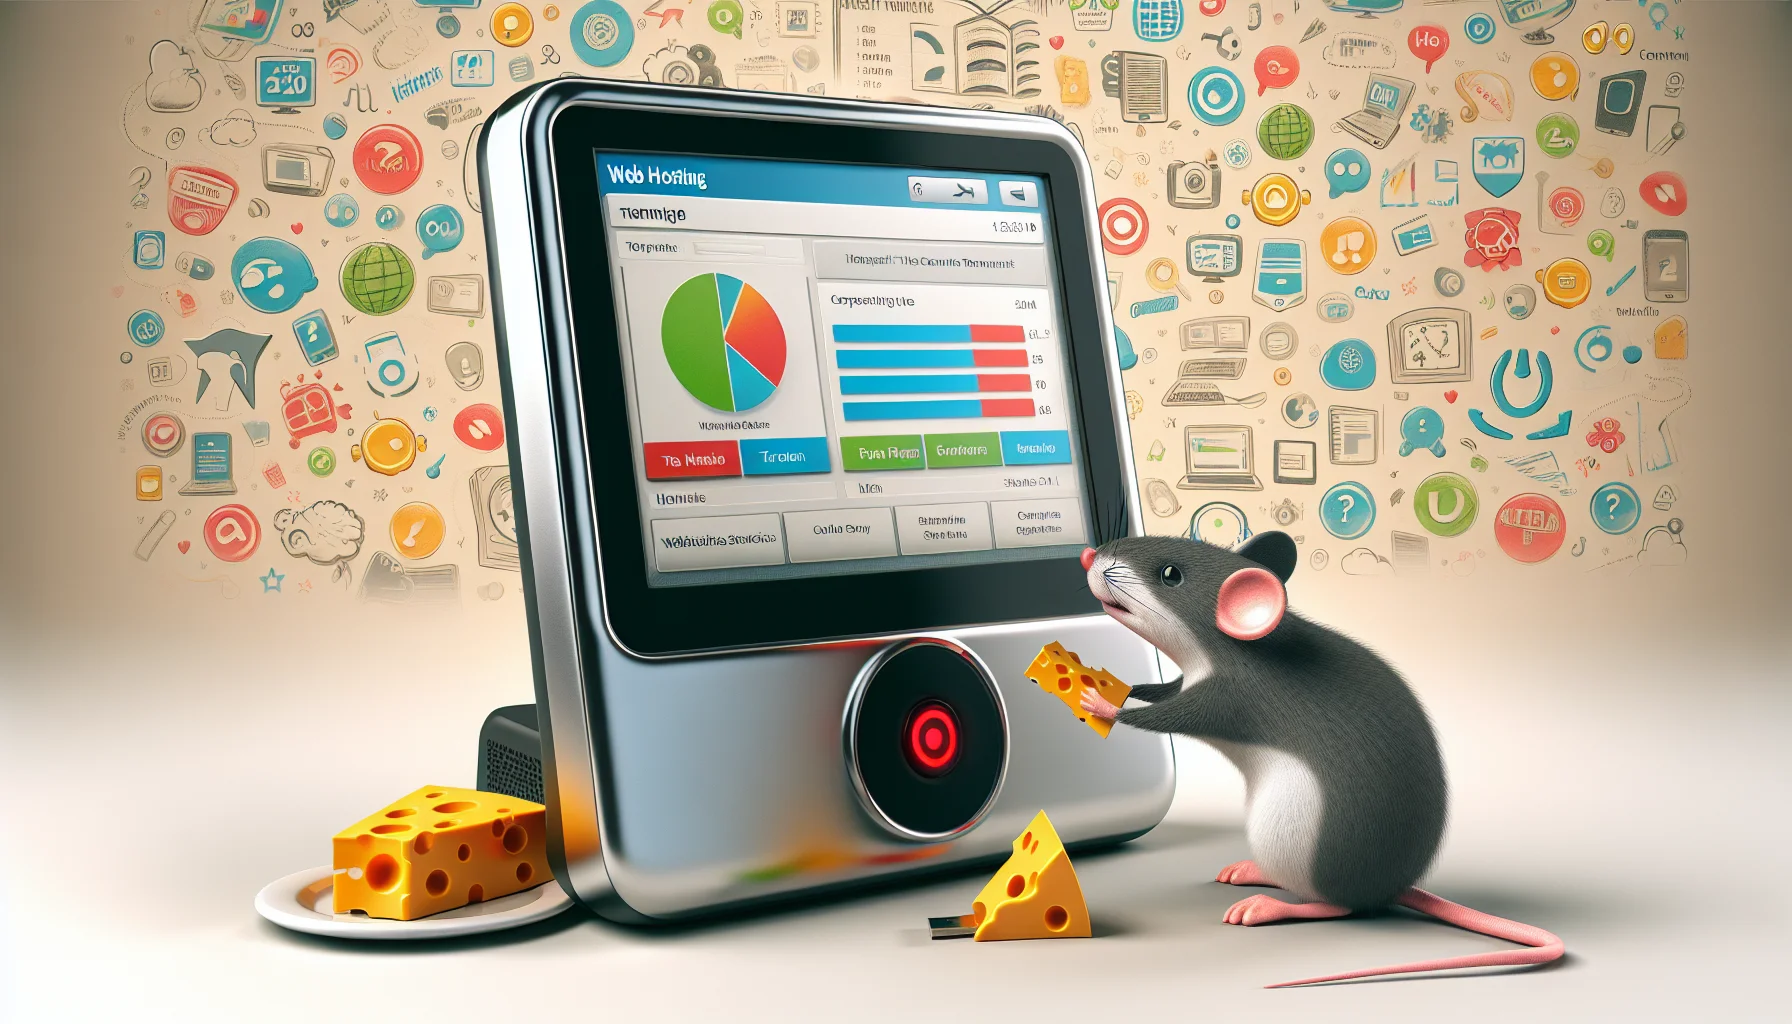 Create a humorous and enticing image that showcases a generic smart terminal for a web hosting service. The terminal itself is sleek, modern with an interactive screen filled with colorful website statistics and icons. In the scenario, a computer mouse is attempting to 'feed' the terminal with a cheese-shaped pendrive as if luring a pet. The background could feature lighthearted, abstract internet and web hosting-related symbols.